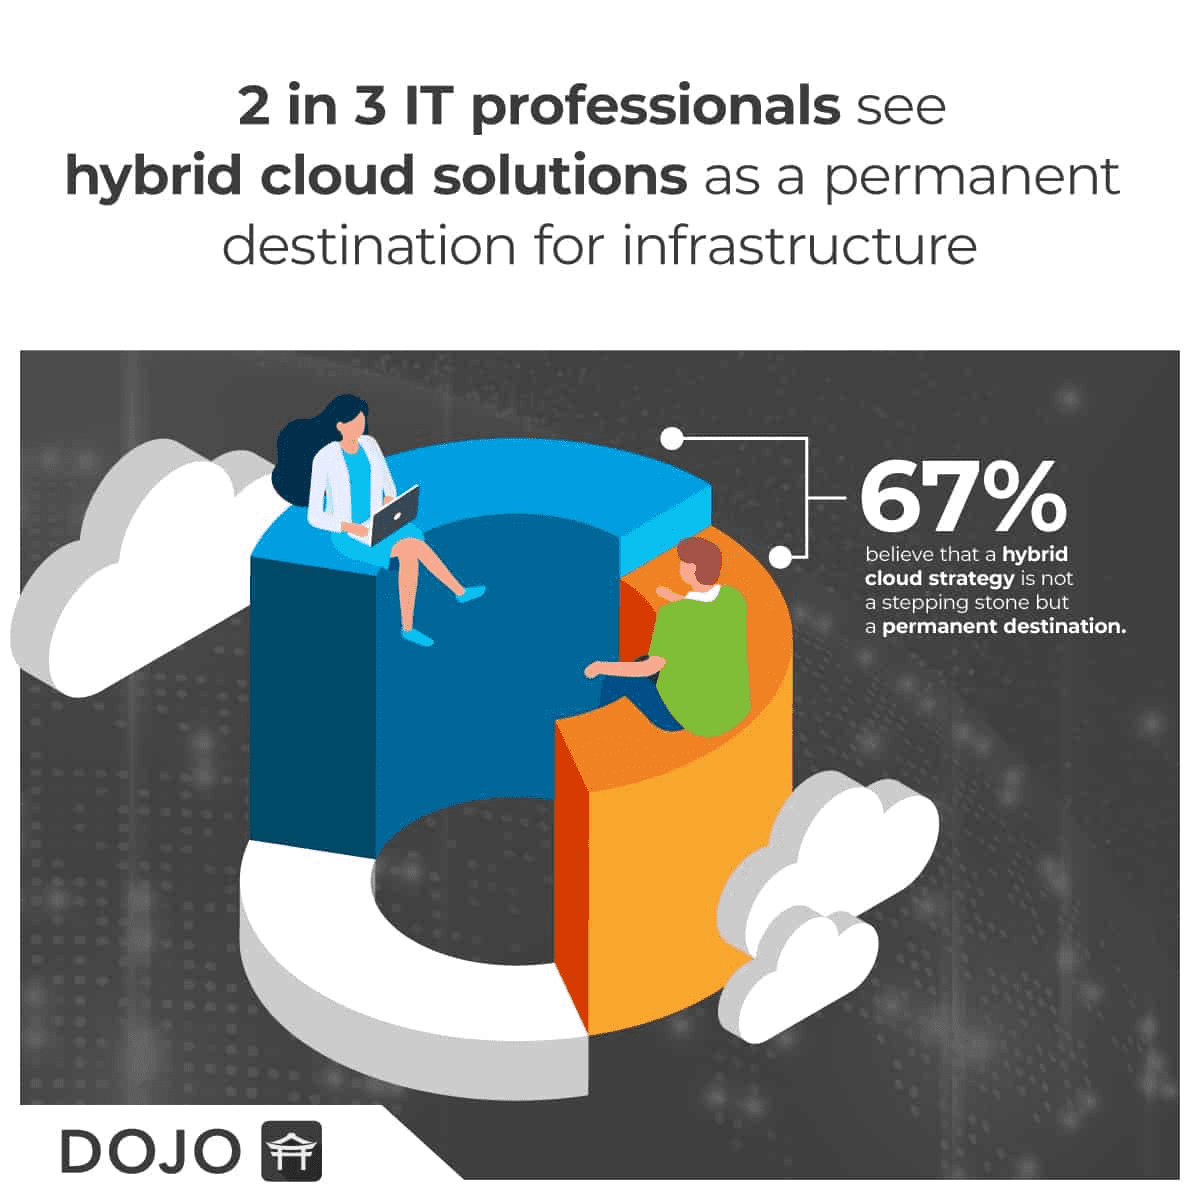 Many IT Pros See Hybrid as a Destination instead of a Temporary State